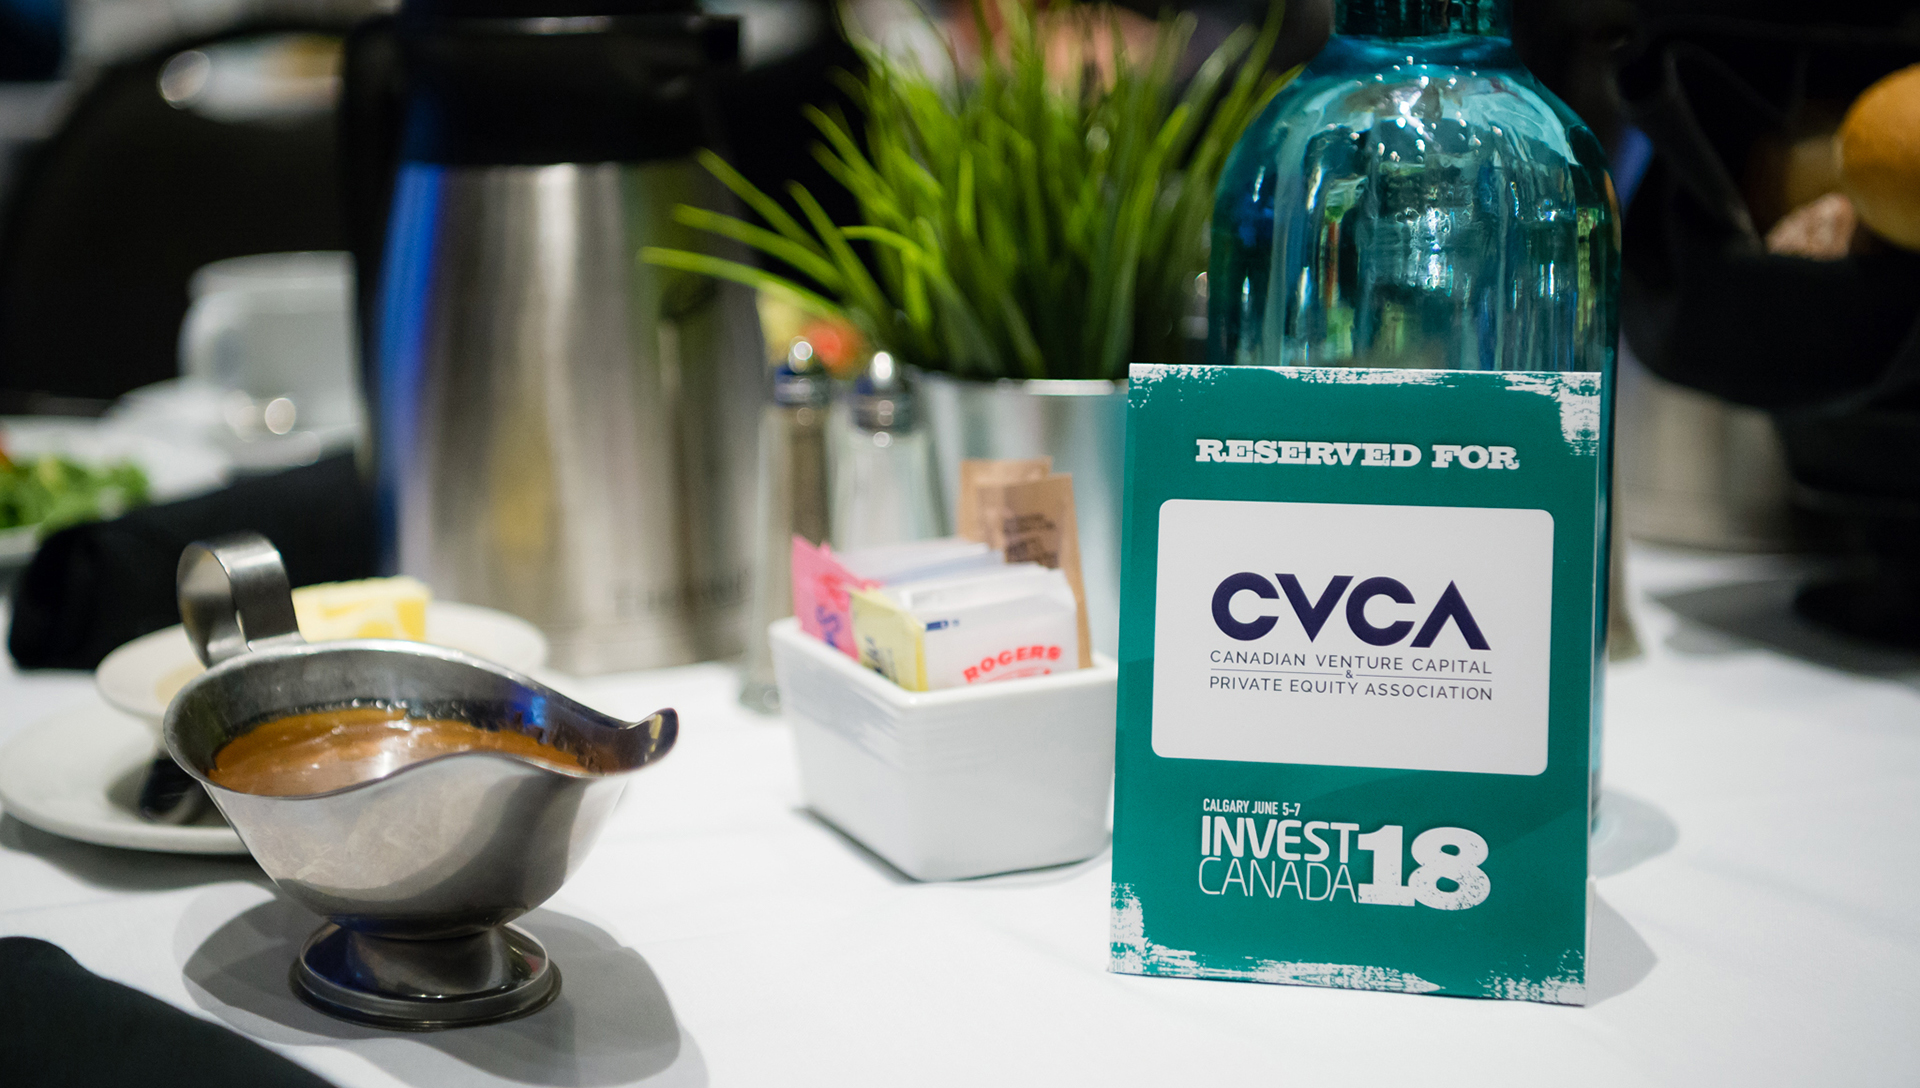 Canadian Venture Capital and Private Equity Association Invest Canada 2018 conference